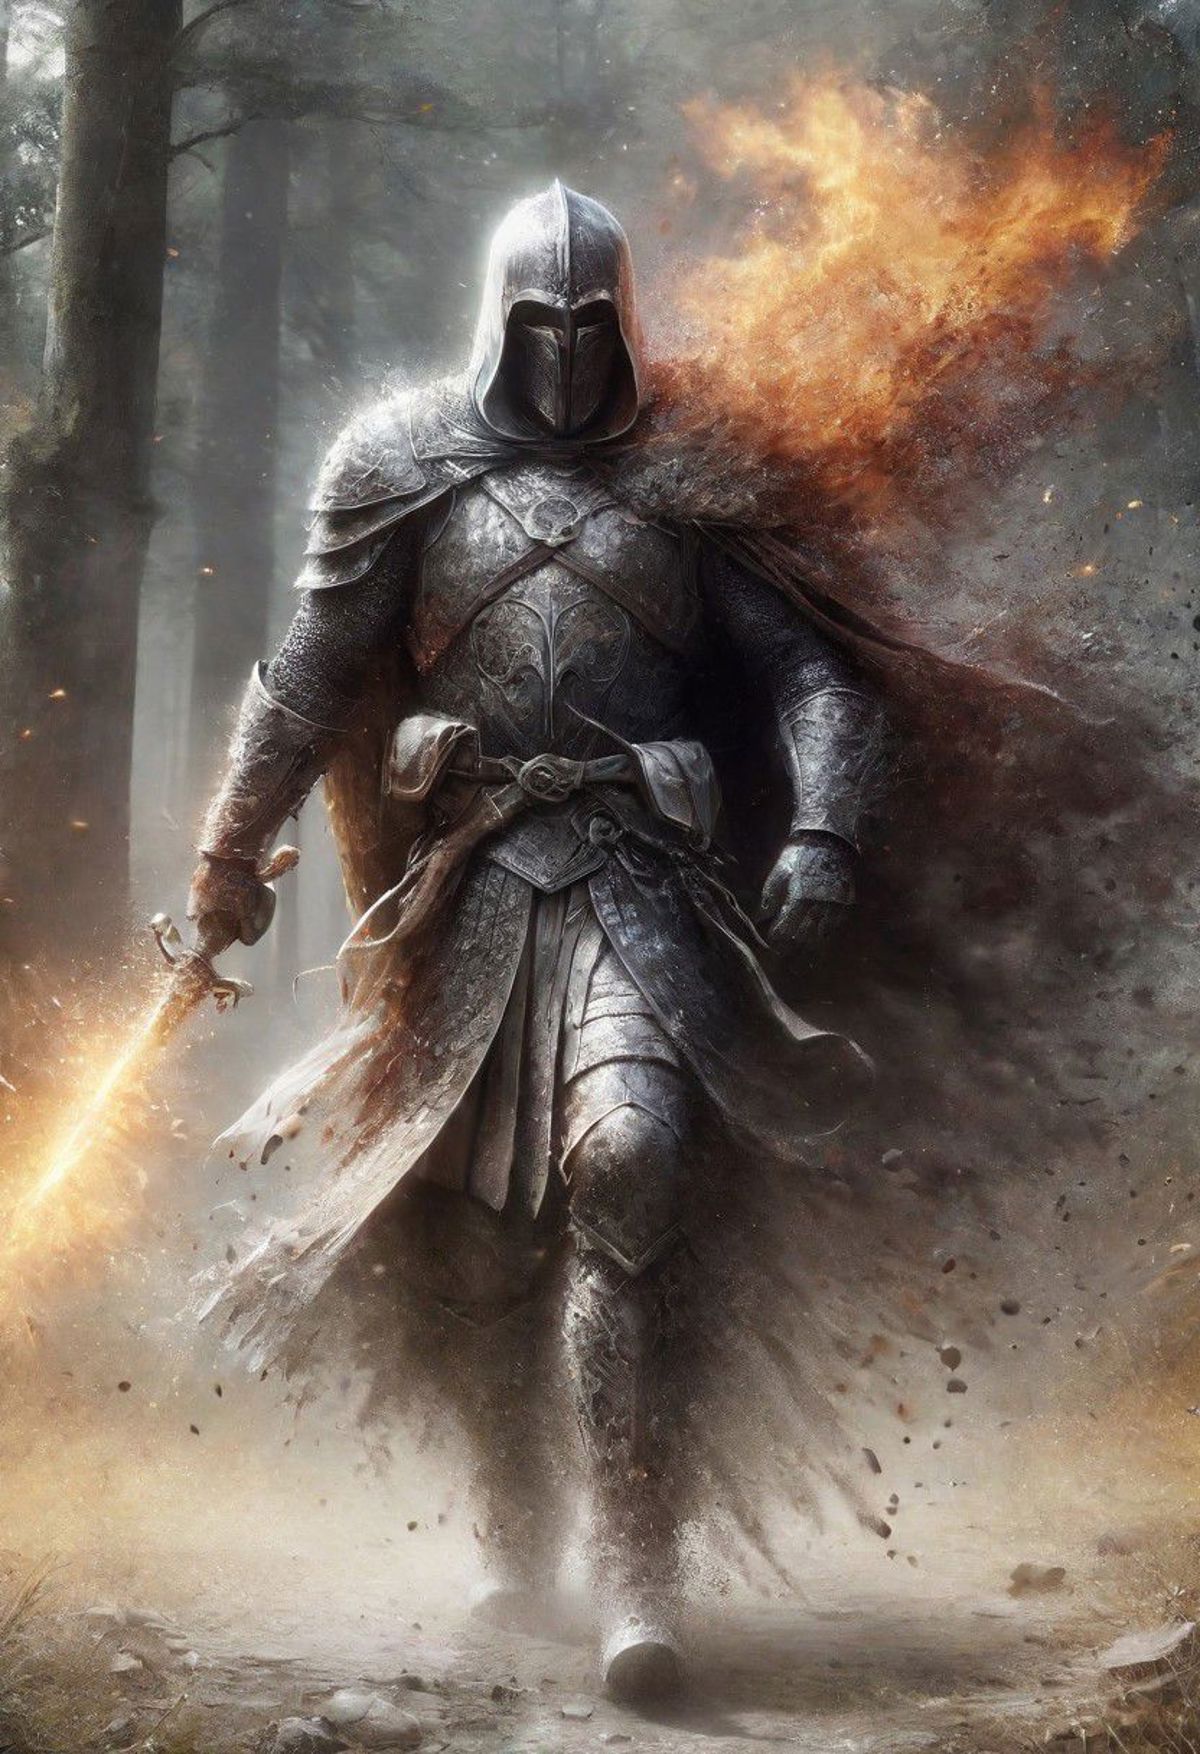 A knight in armor with a sword, walking through a forest.